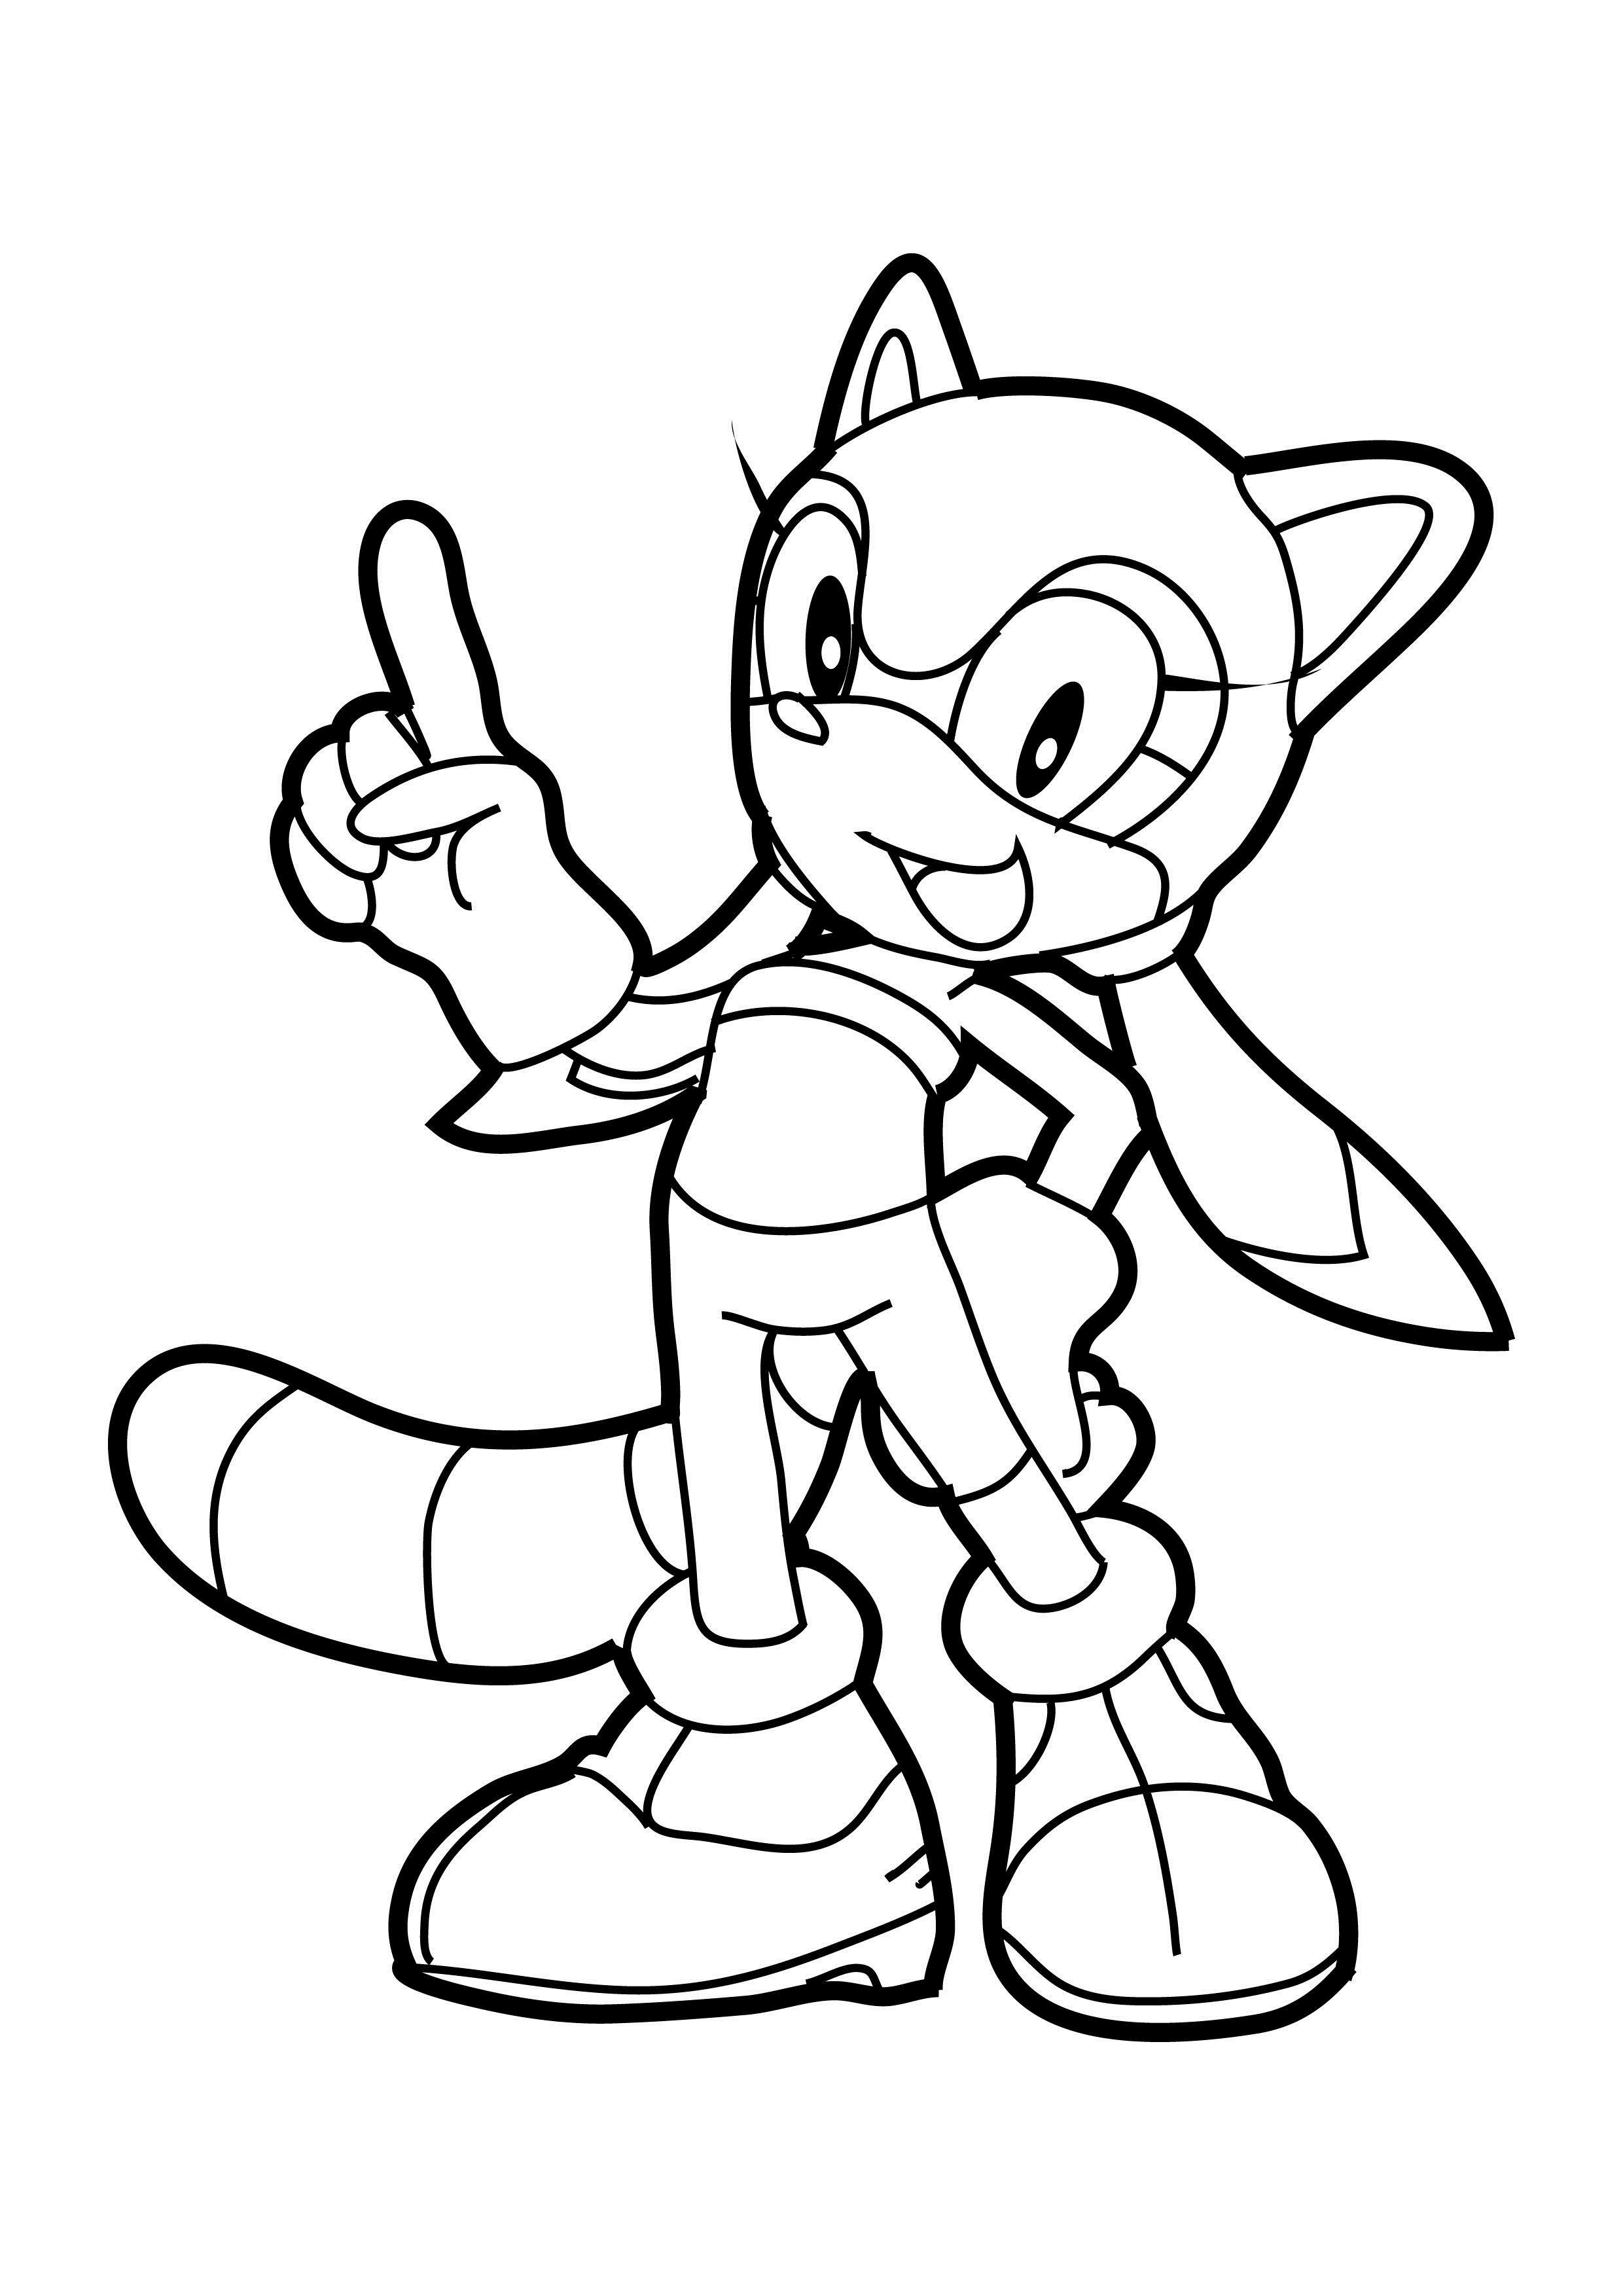 Metal Sonic Coloring Pages - Get Coloring Pages